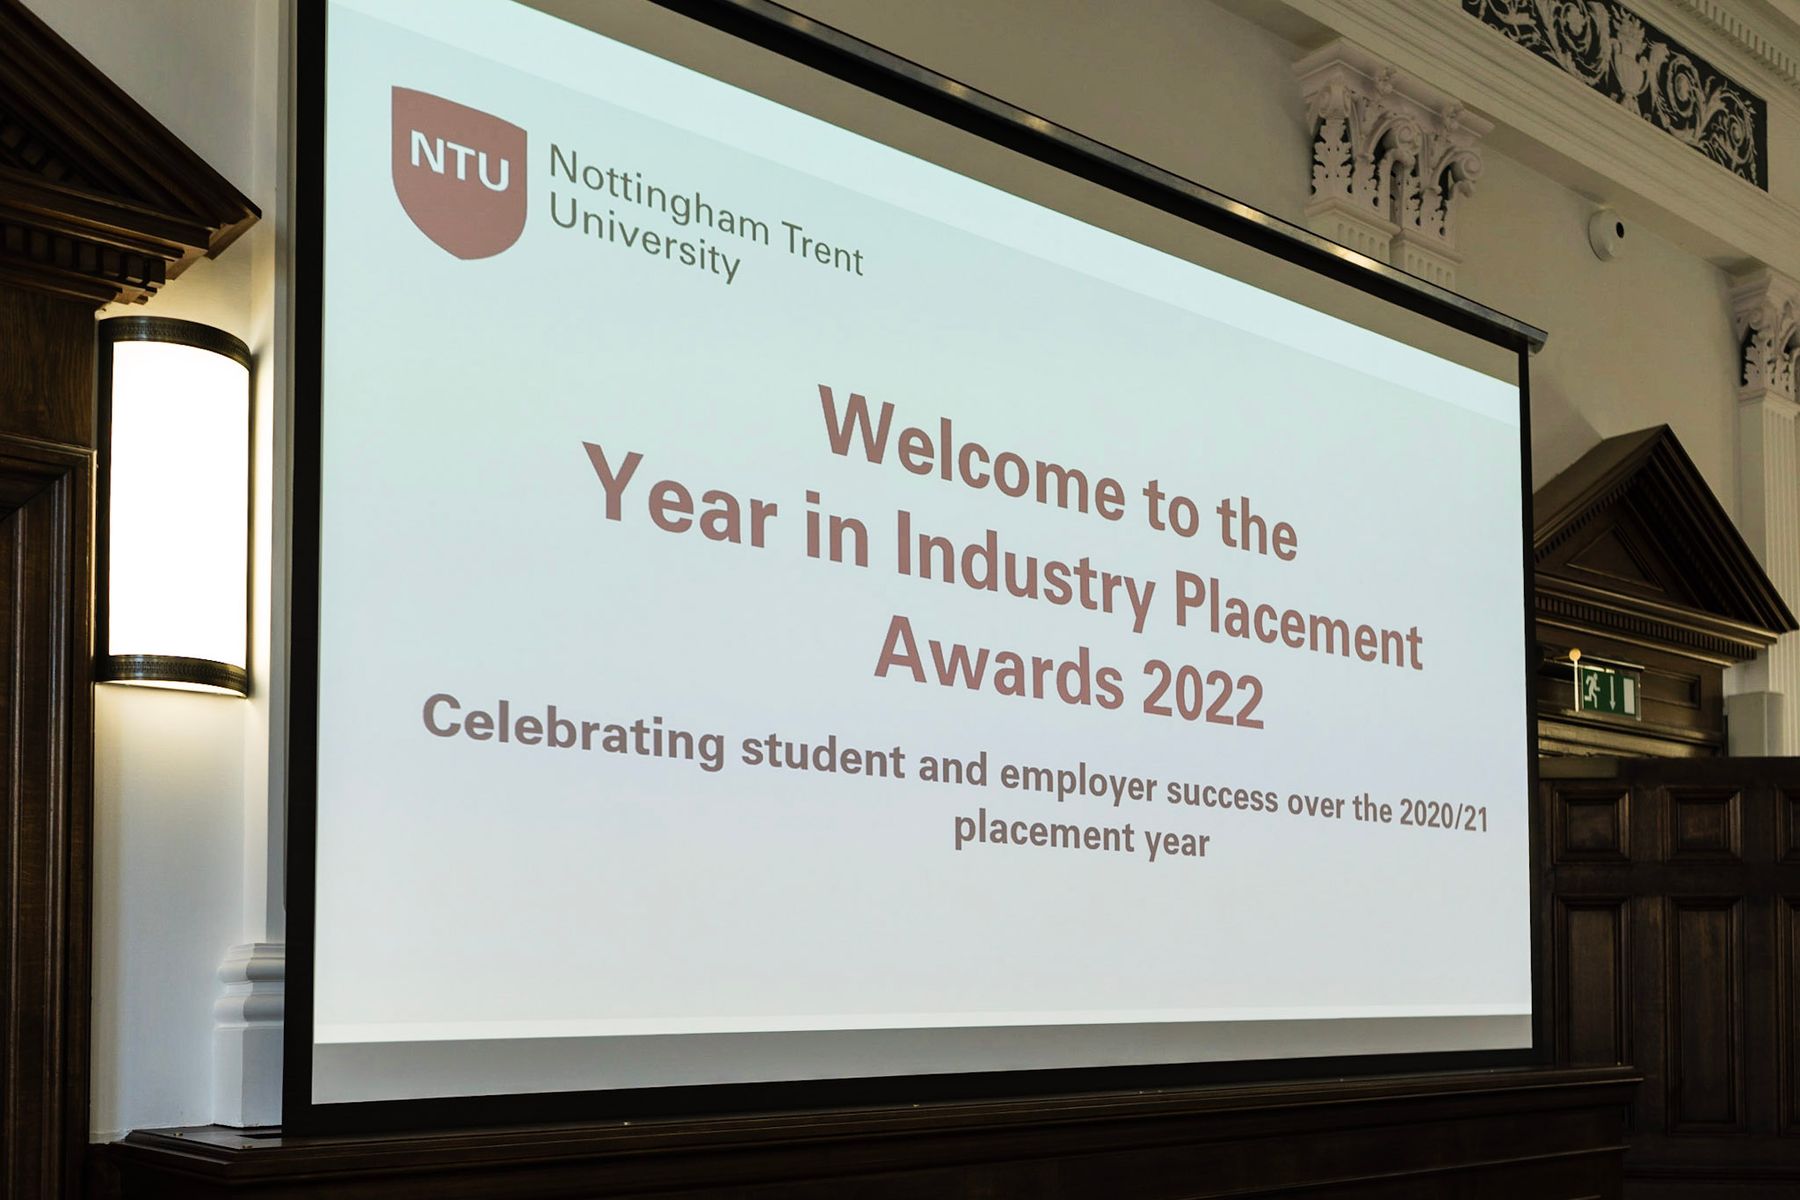 Presentation Slide - Welcome to the Year in Industry Placement Awards 2022